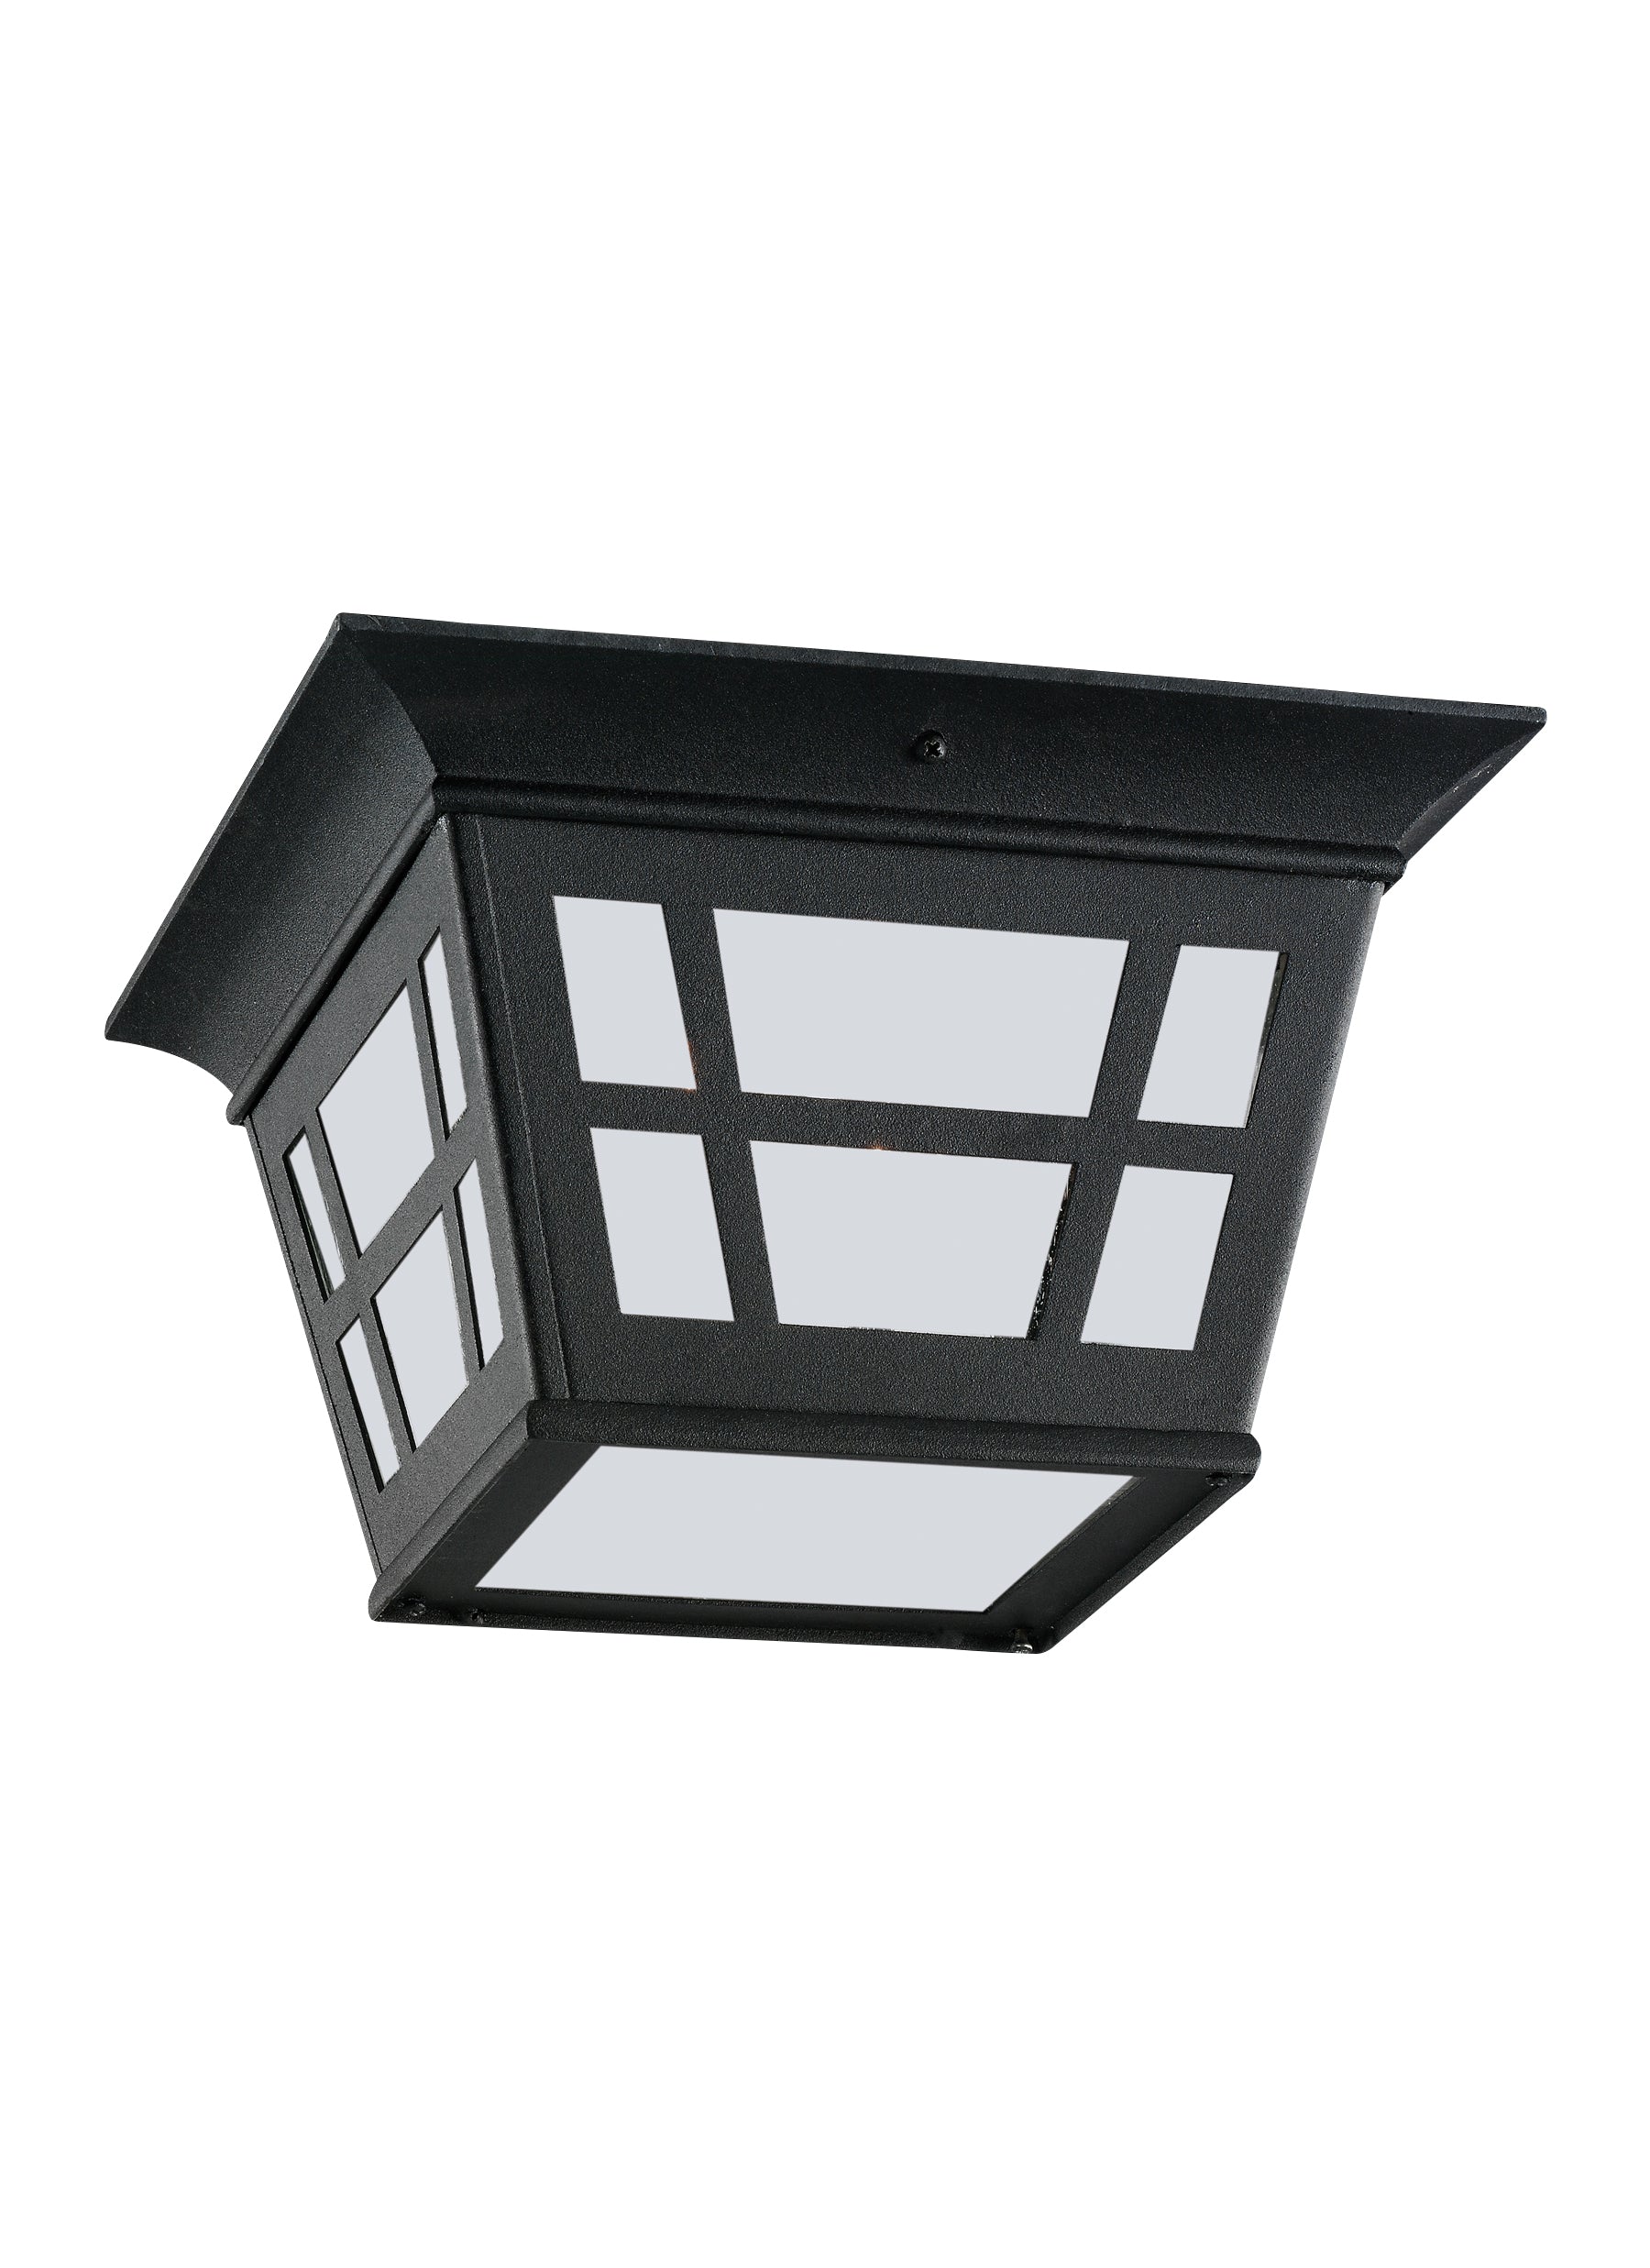 Herrington transitional 2-light outdoor exterior ceiling flush mount in black finish with etched white glass panels